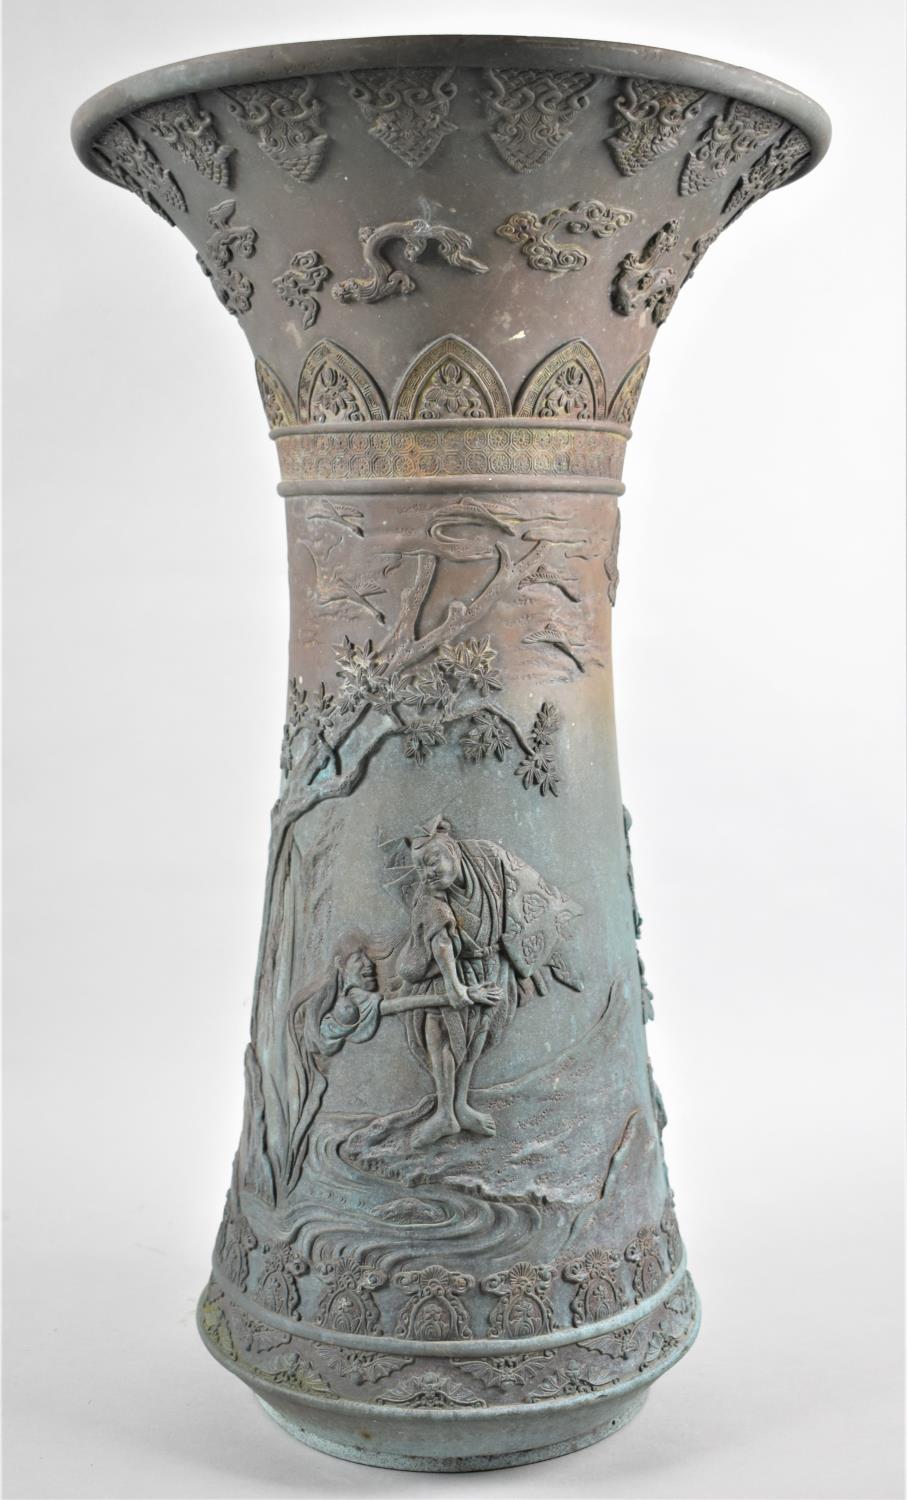 A Large Heavy Japanese Bronze Vase Decorated in High Relief Telling the Story of Oiwa from the - Image 8 of 9